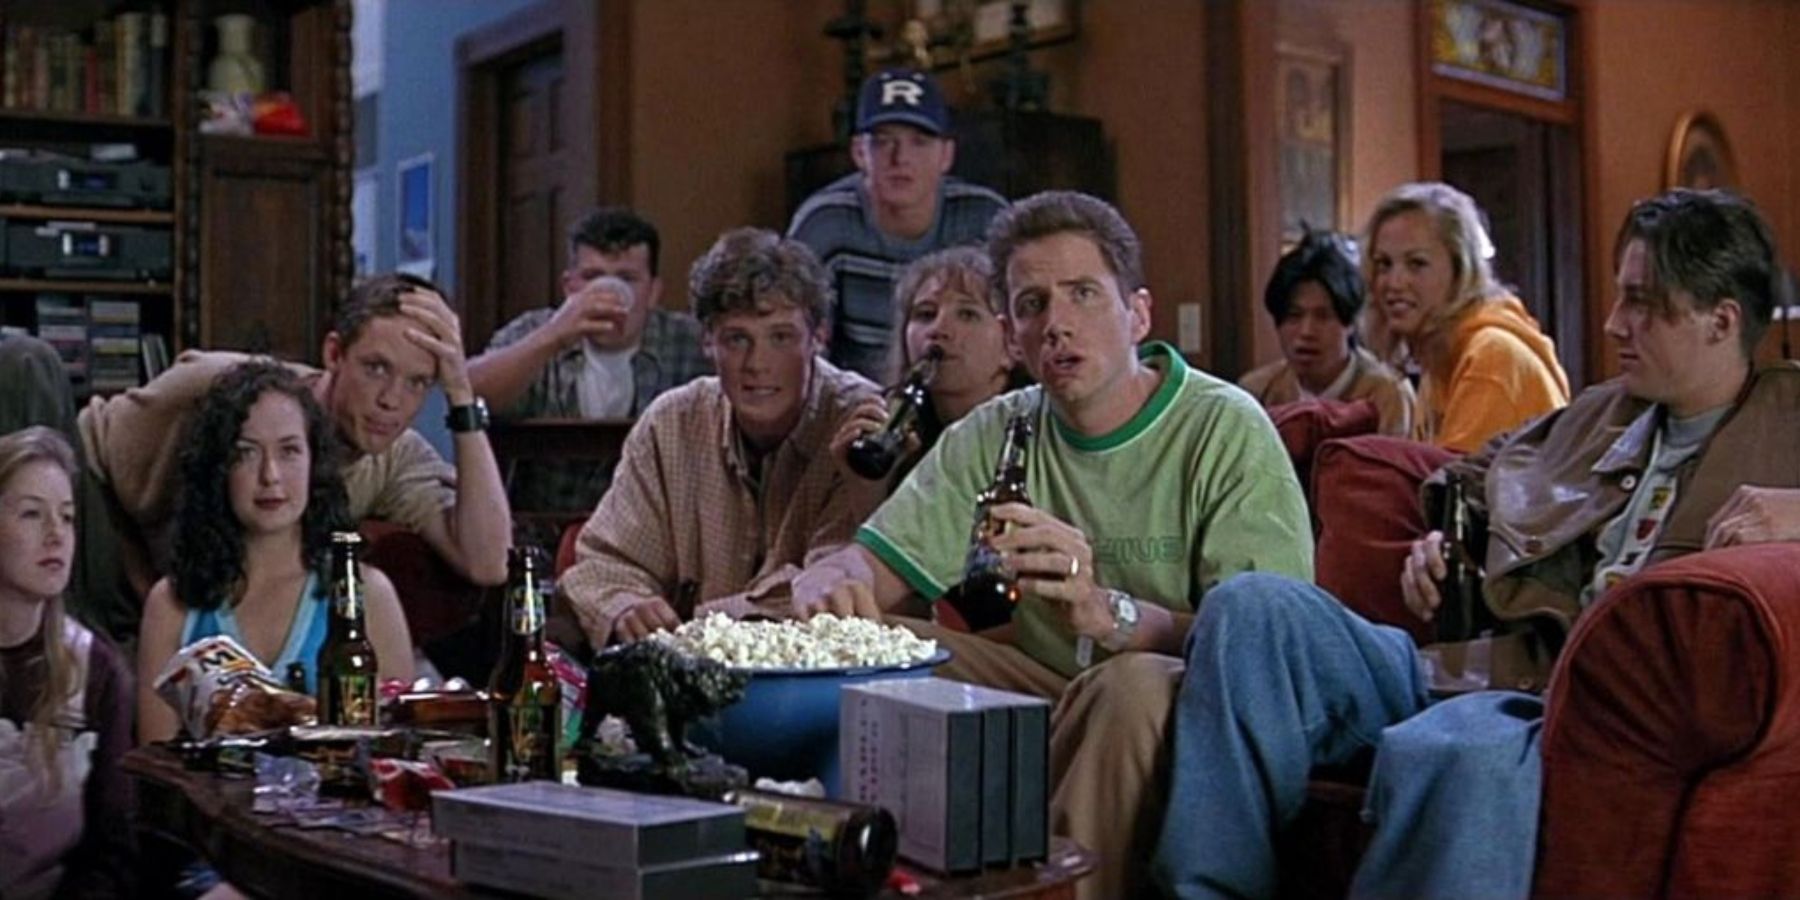 Randy Meeks (Jamie Kennedy) sitting with people at a party in Scream (1996)